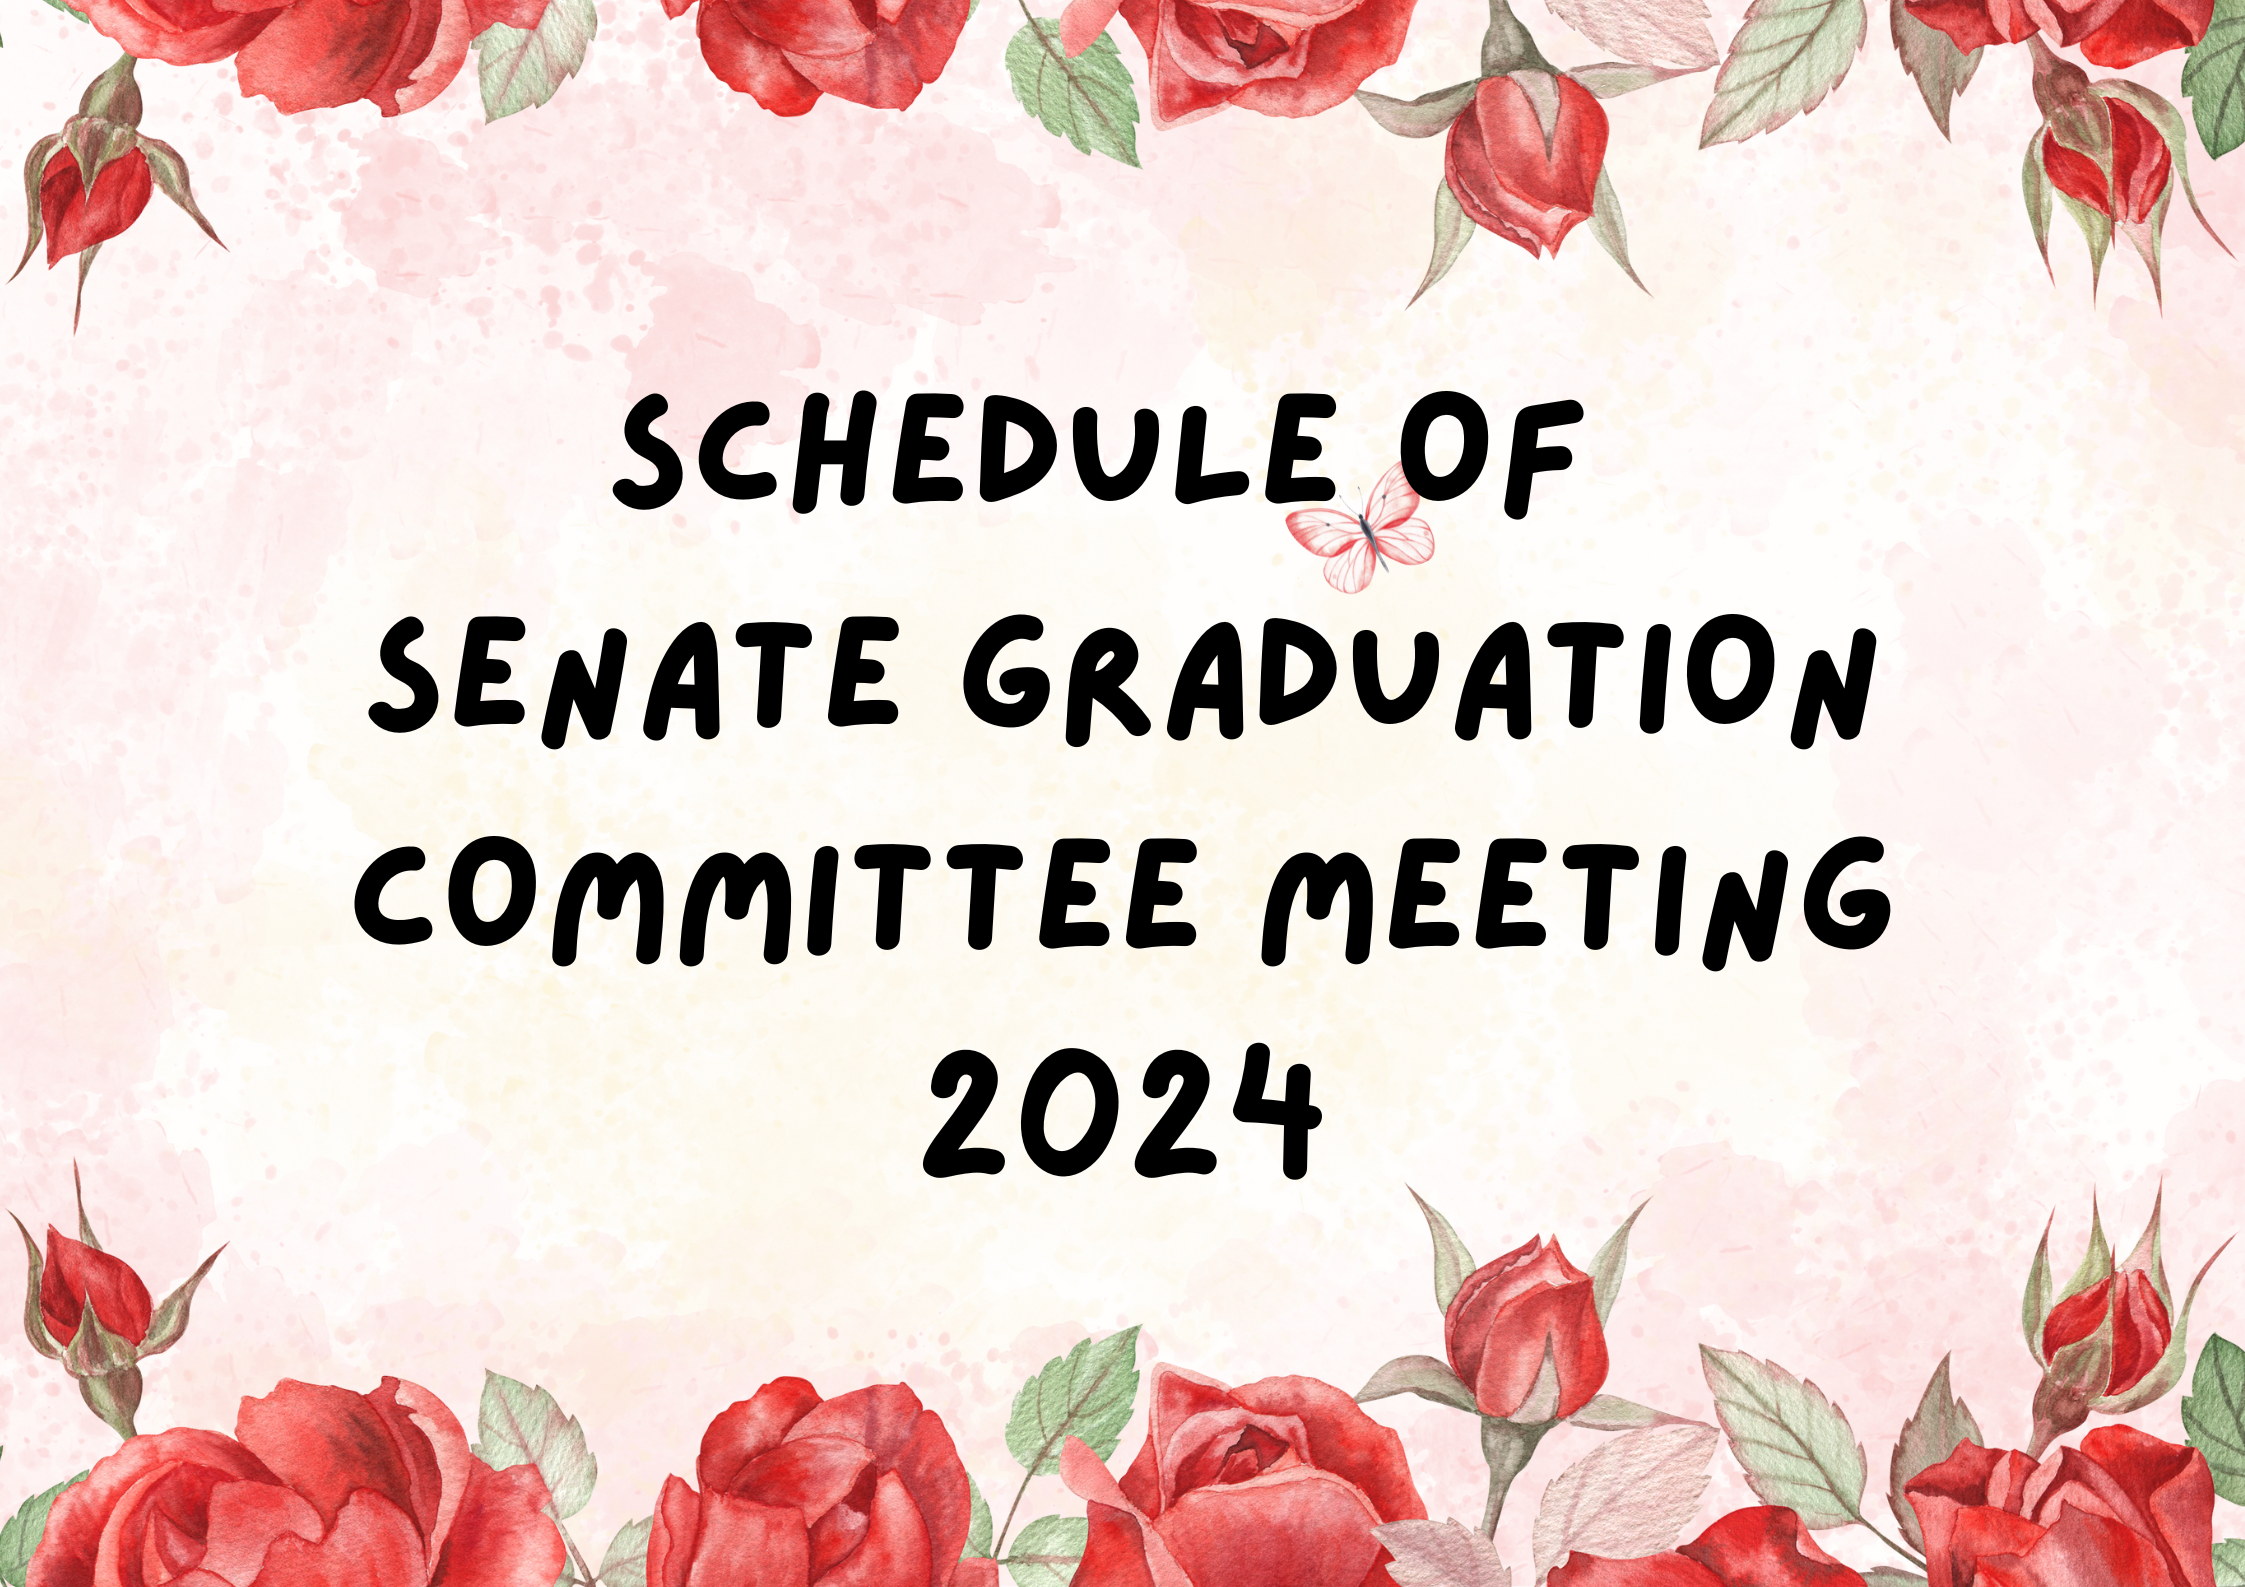 ANNOUNCEMENT ON UPDATED SCHEDULE FOR SENATE GRADUATION COMMITTEE MEETING 2024